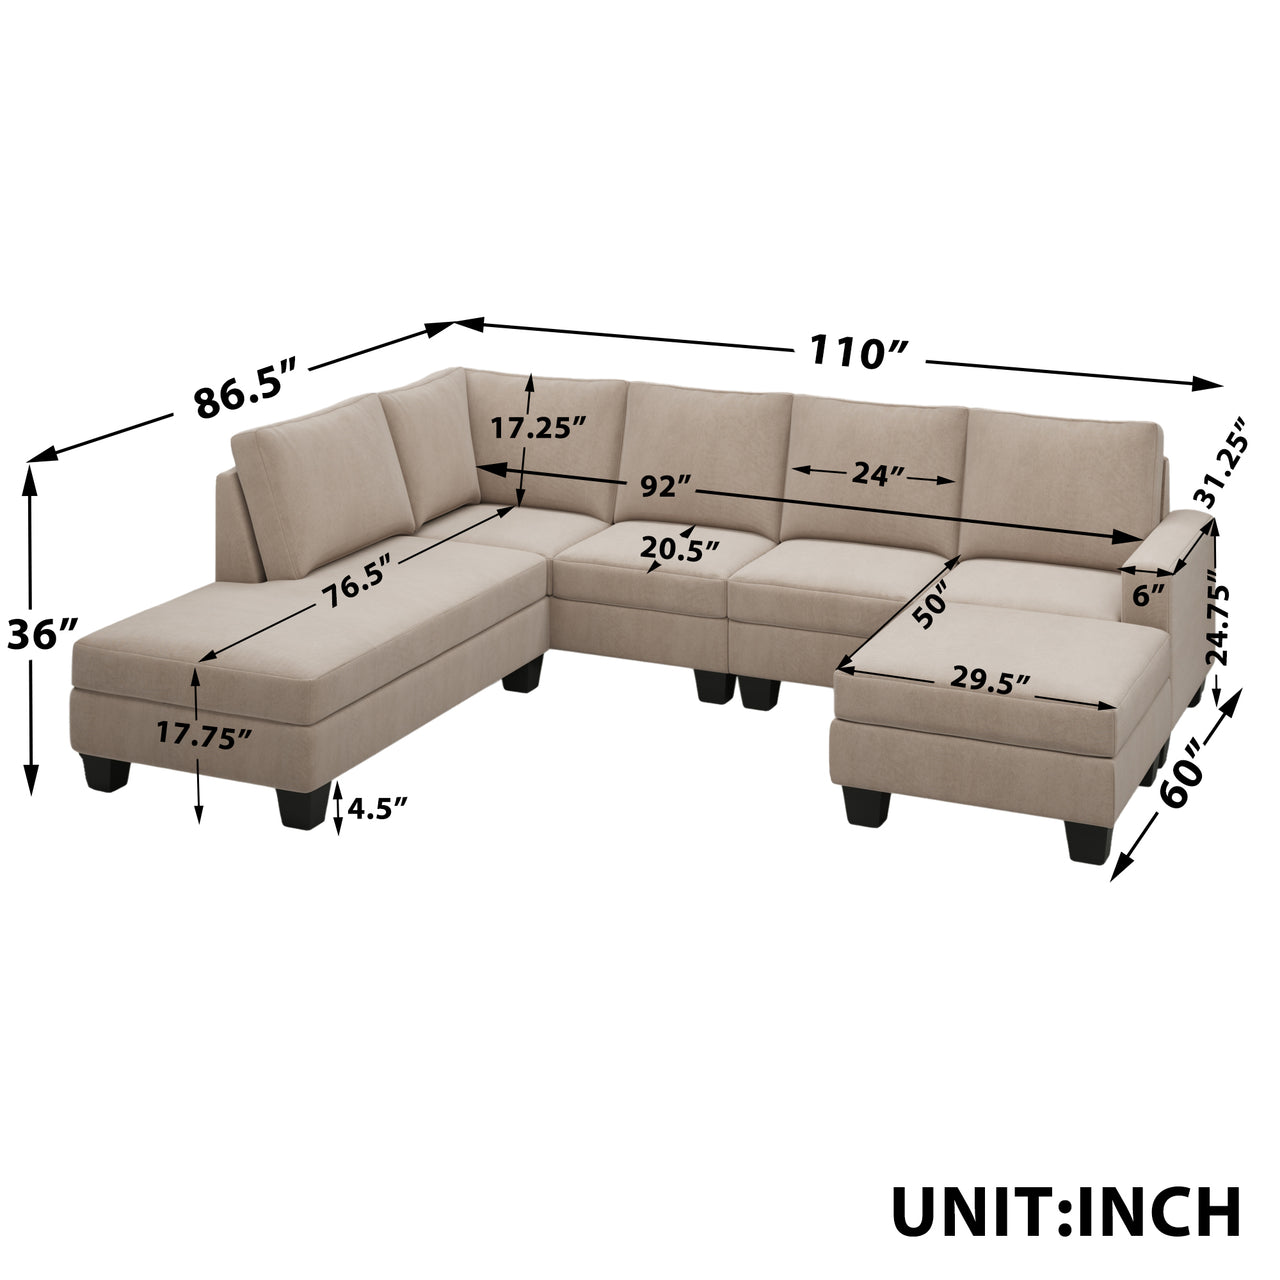 [New] [Video] 110*86.5*36  Textured Fabric Sectional Sofa Set, 4 pieces, U-shaped Sofa With Removable Ottoman, Left-arm Facing Chaise, Grey